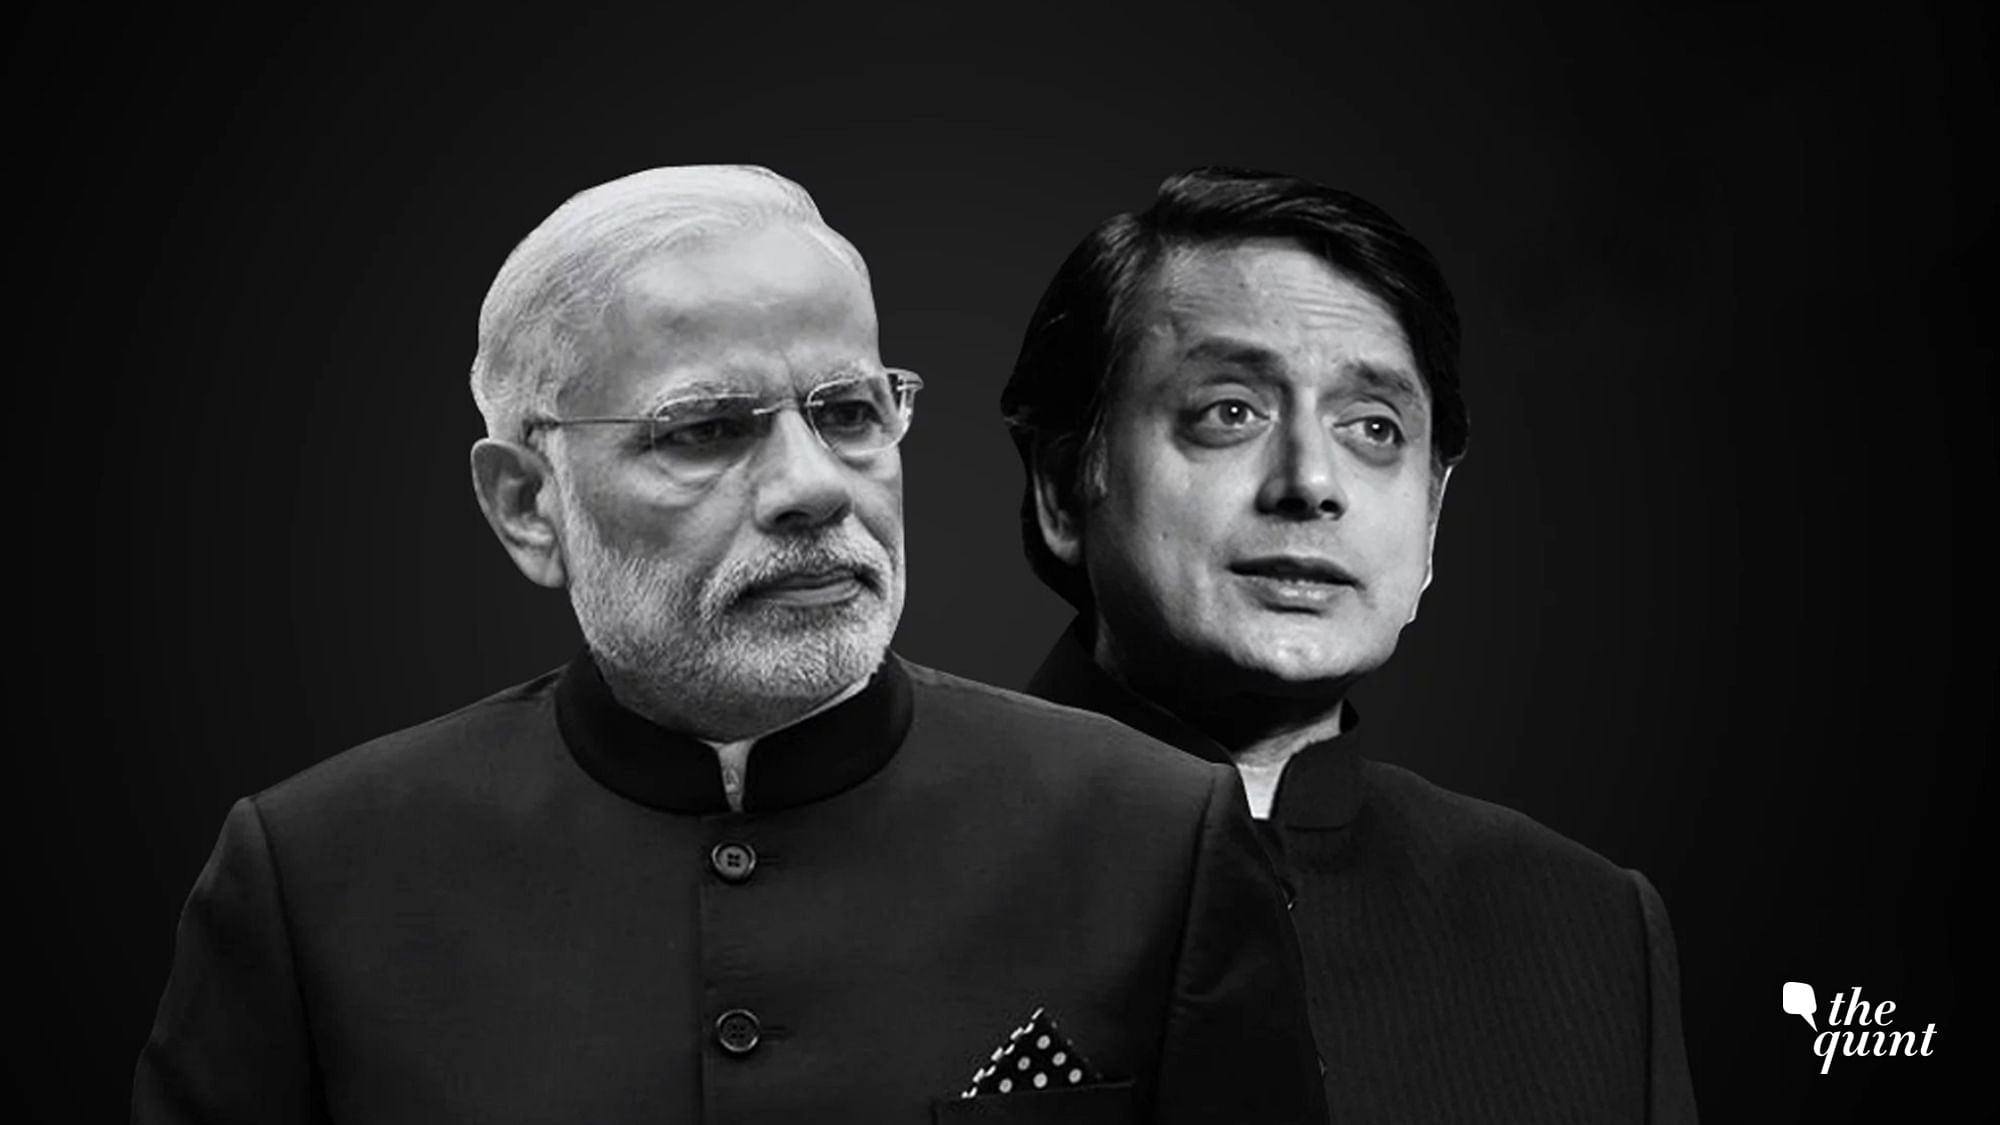 The story of the last four years is one of missed opportunities and dashed hopes, of waiting for ‘achhe din’ that never came, says Shashi Tharoor.